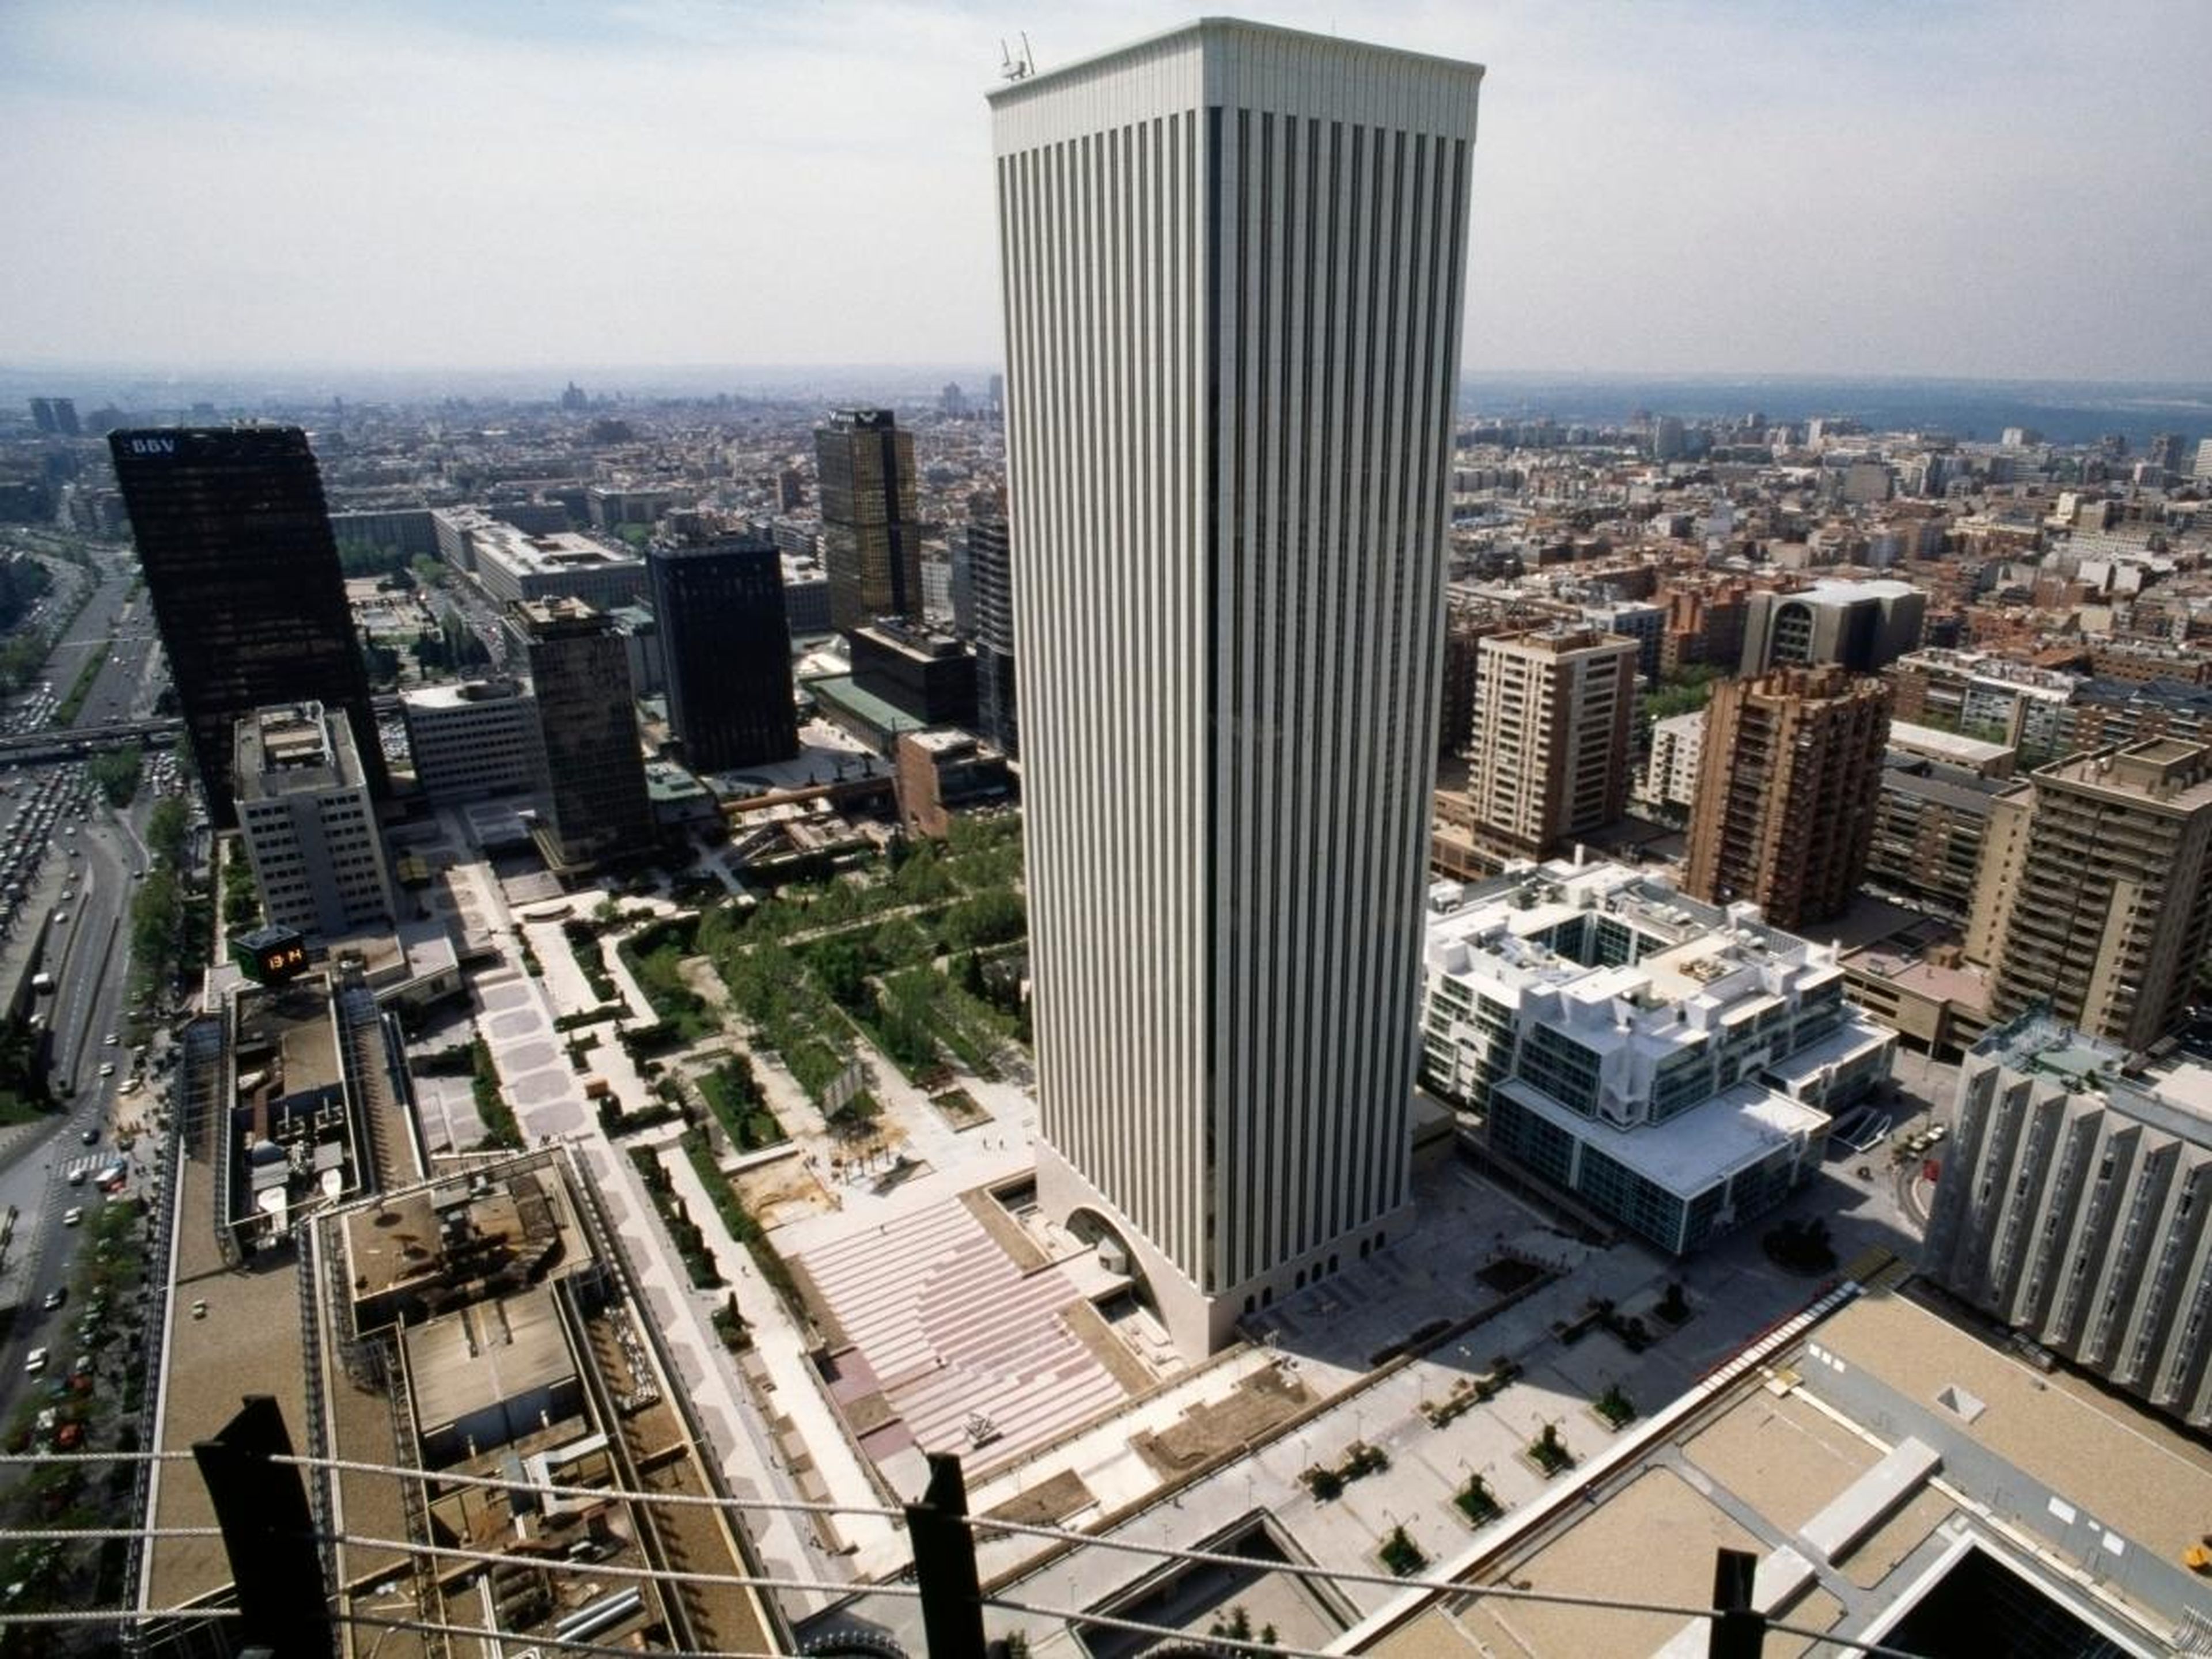 Ortega owns significant real estate assets, many through his company's real-estate investment arm, Pontegadea Inmobiliaria. In 2011, he bought the tallest skyscraper in Spain at 515 feet, the Torre Picasso in Madrid, for $536